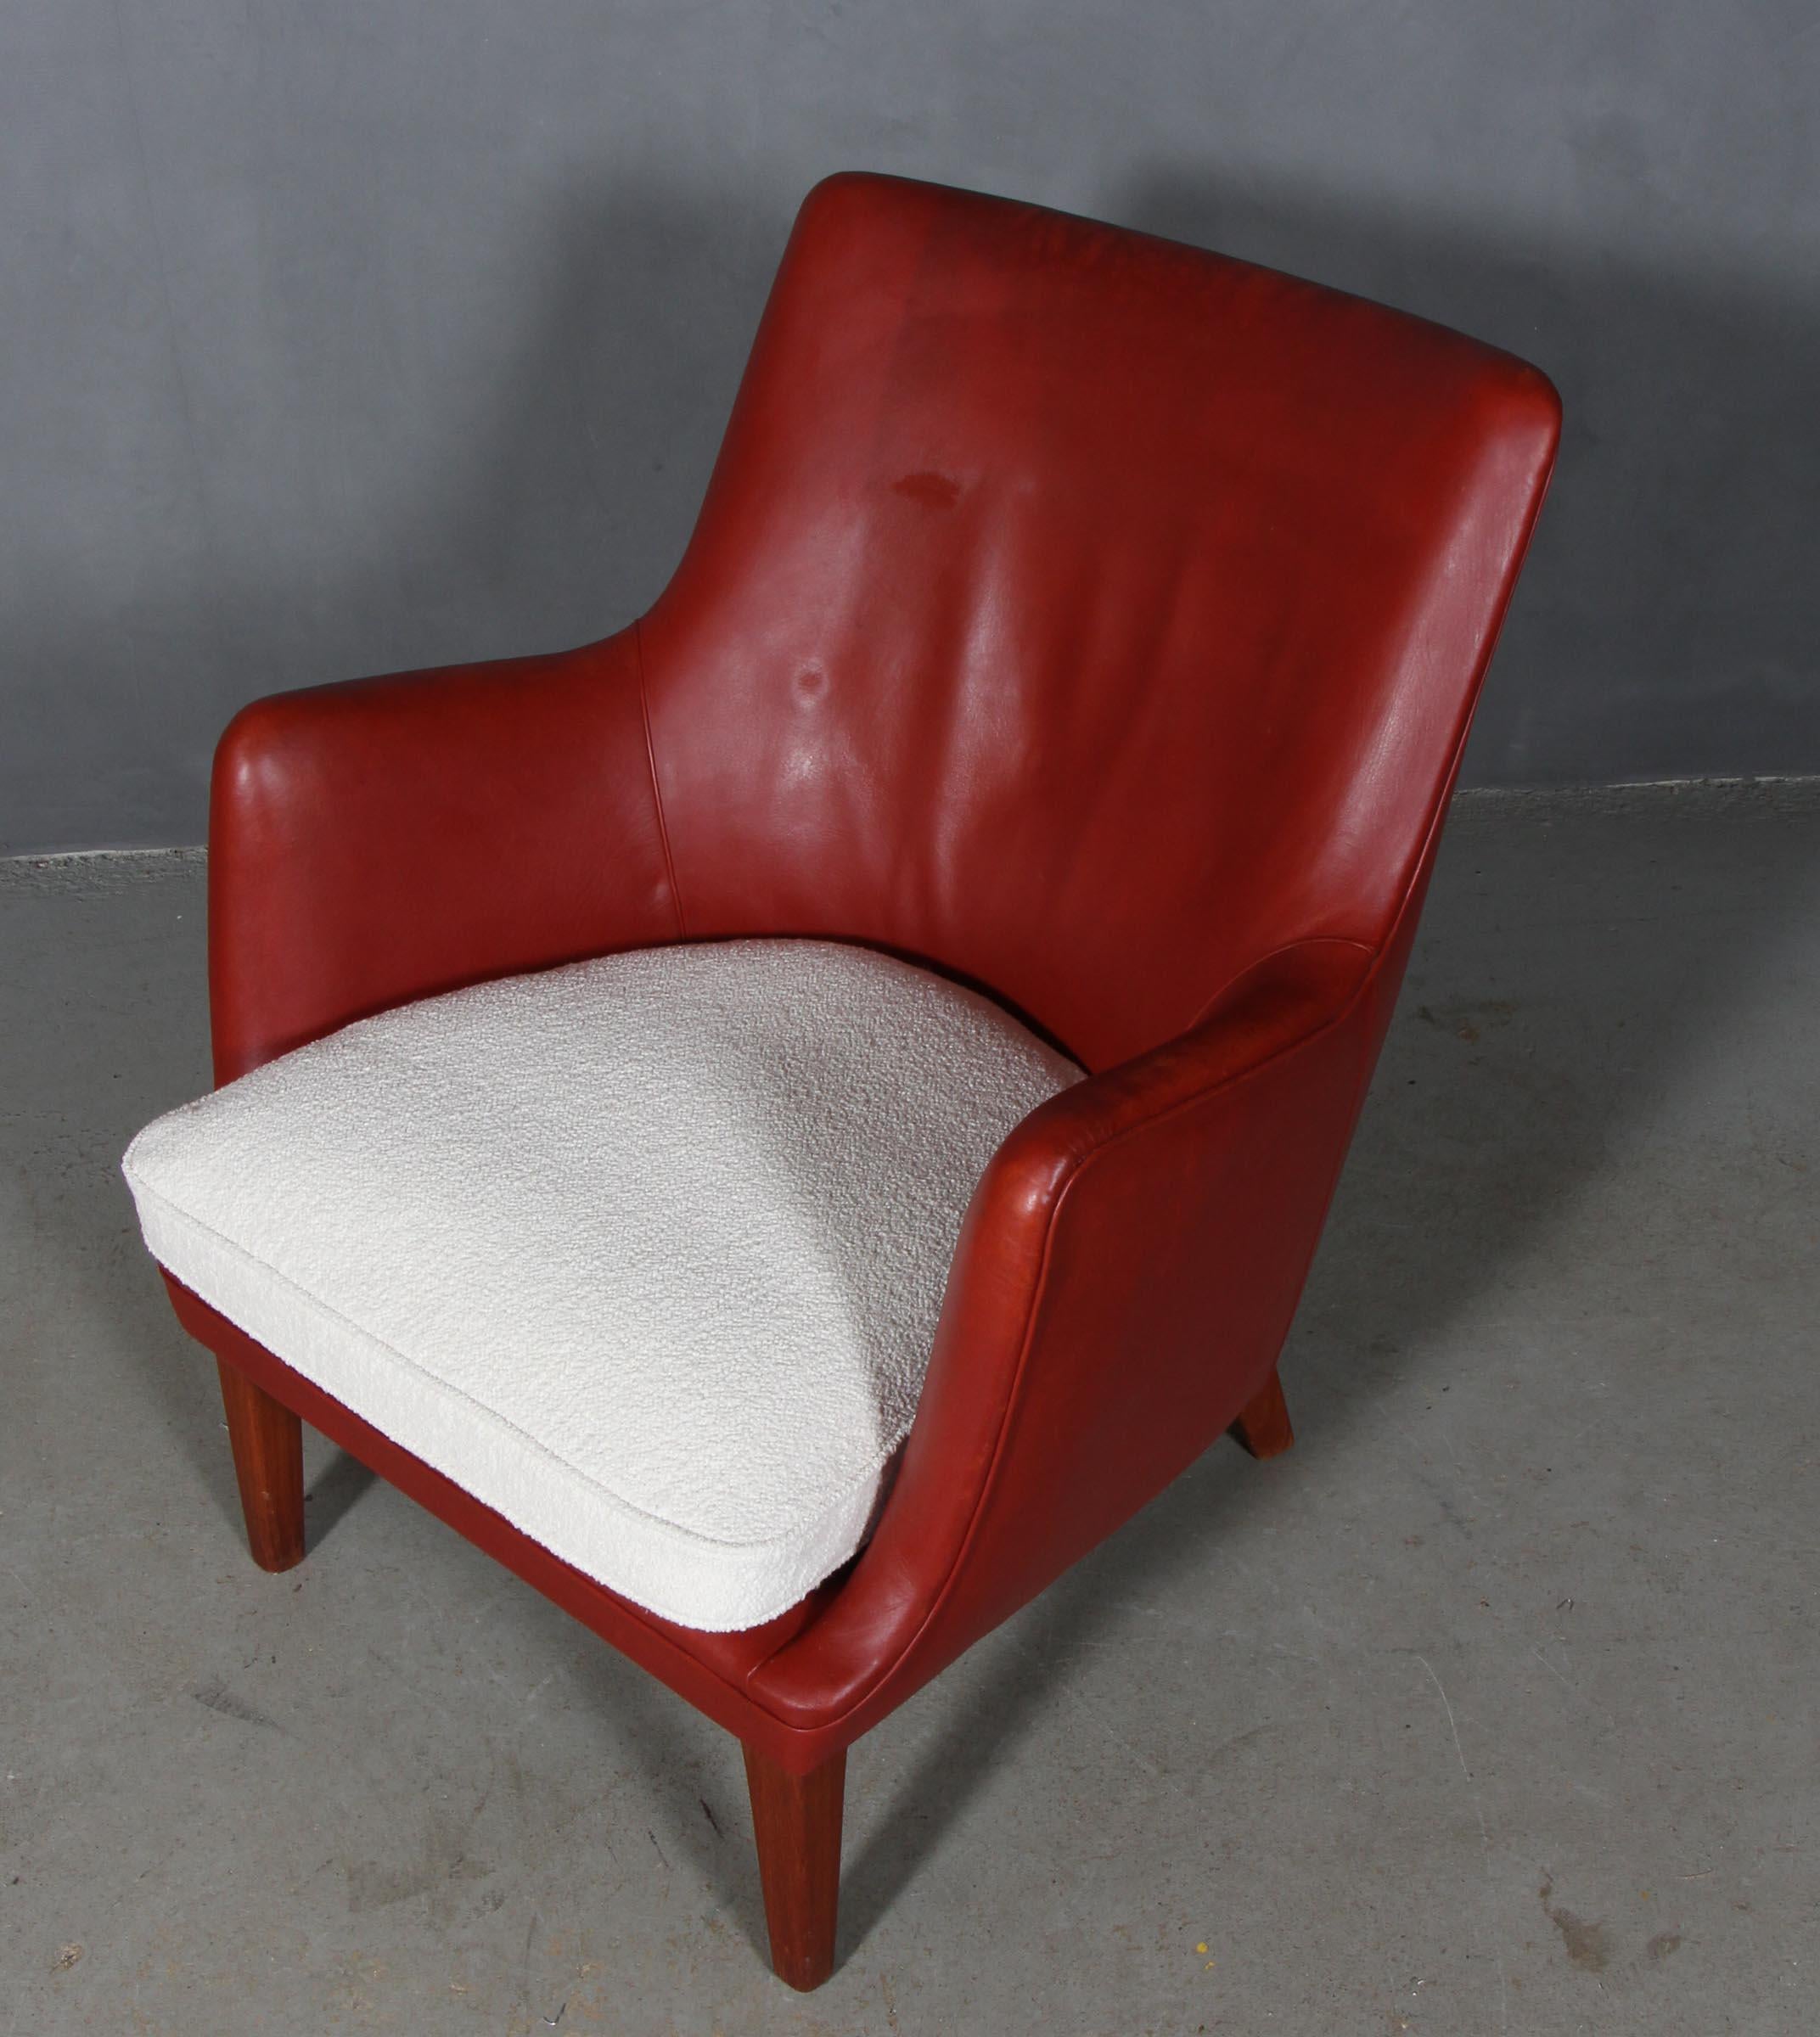 Arne Vodder lounge chair in original red patinated leather.

Cushion of white boucle.

Legs of teak. 

Made by Ivan Schlechter. With metal plate from cabinetmaker.